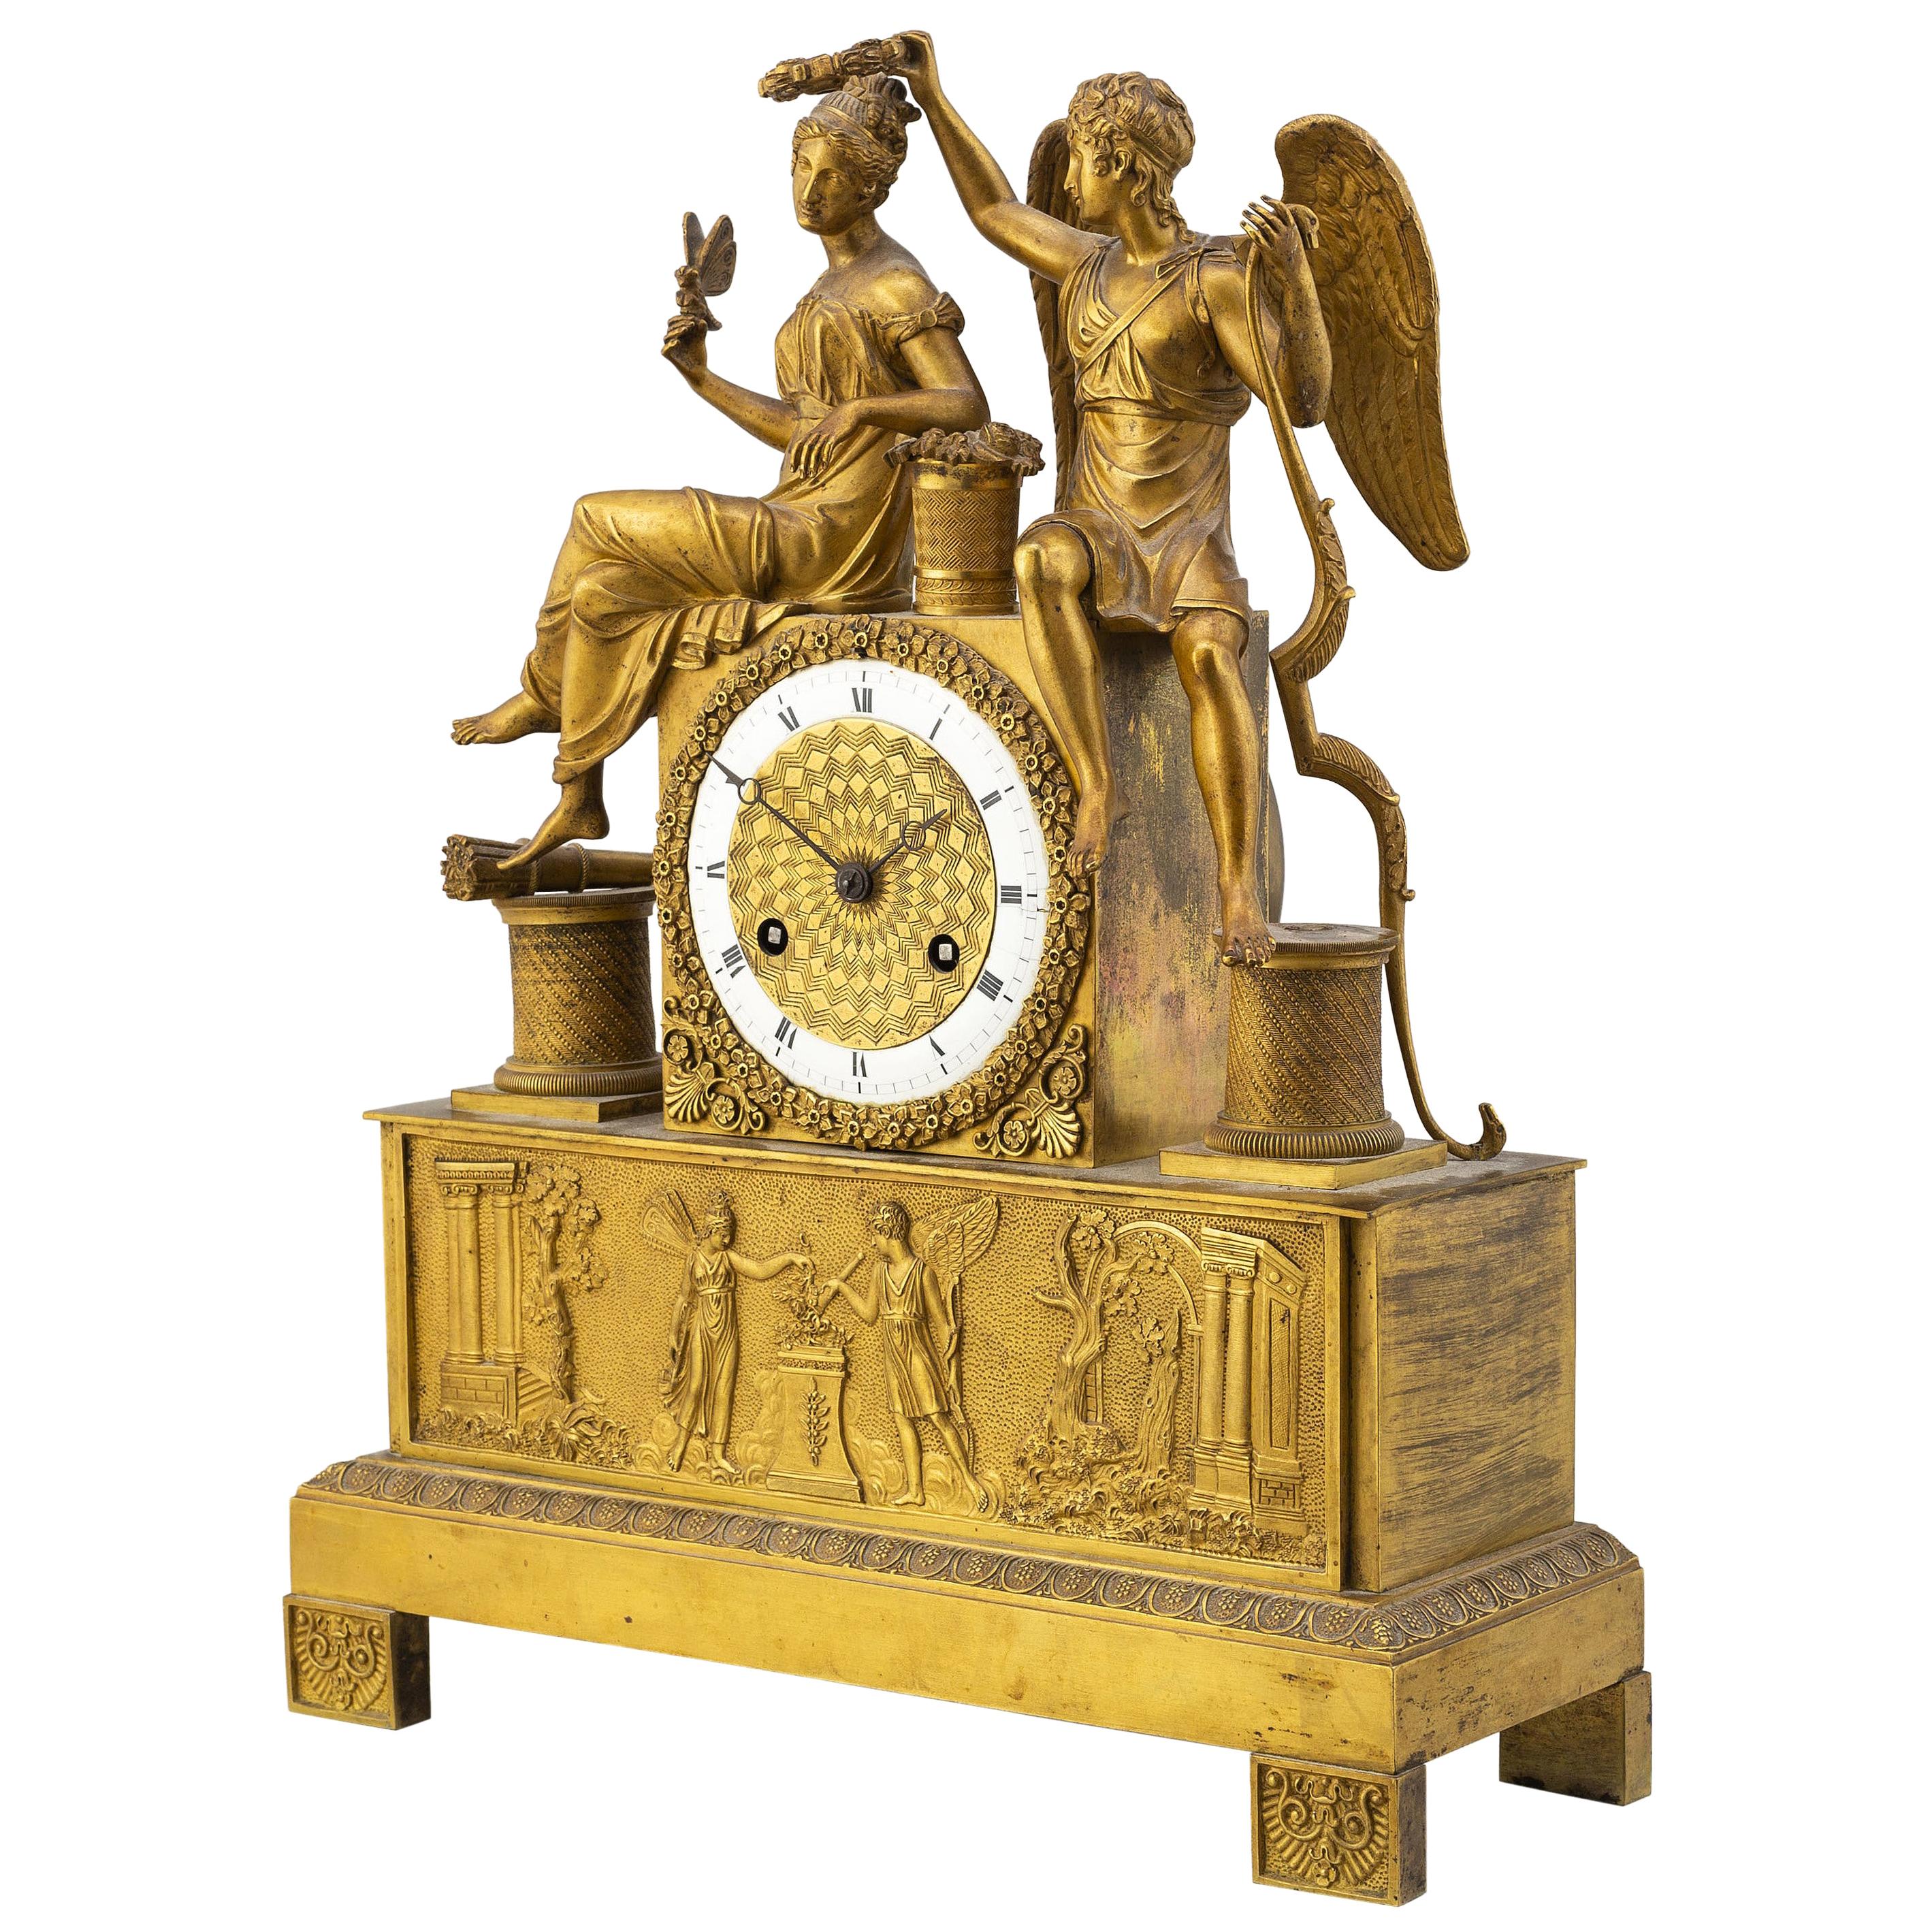 Gilt French Empire Table Clock, Early 1800s